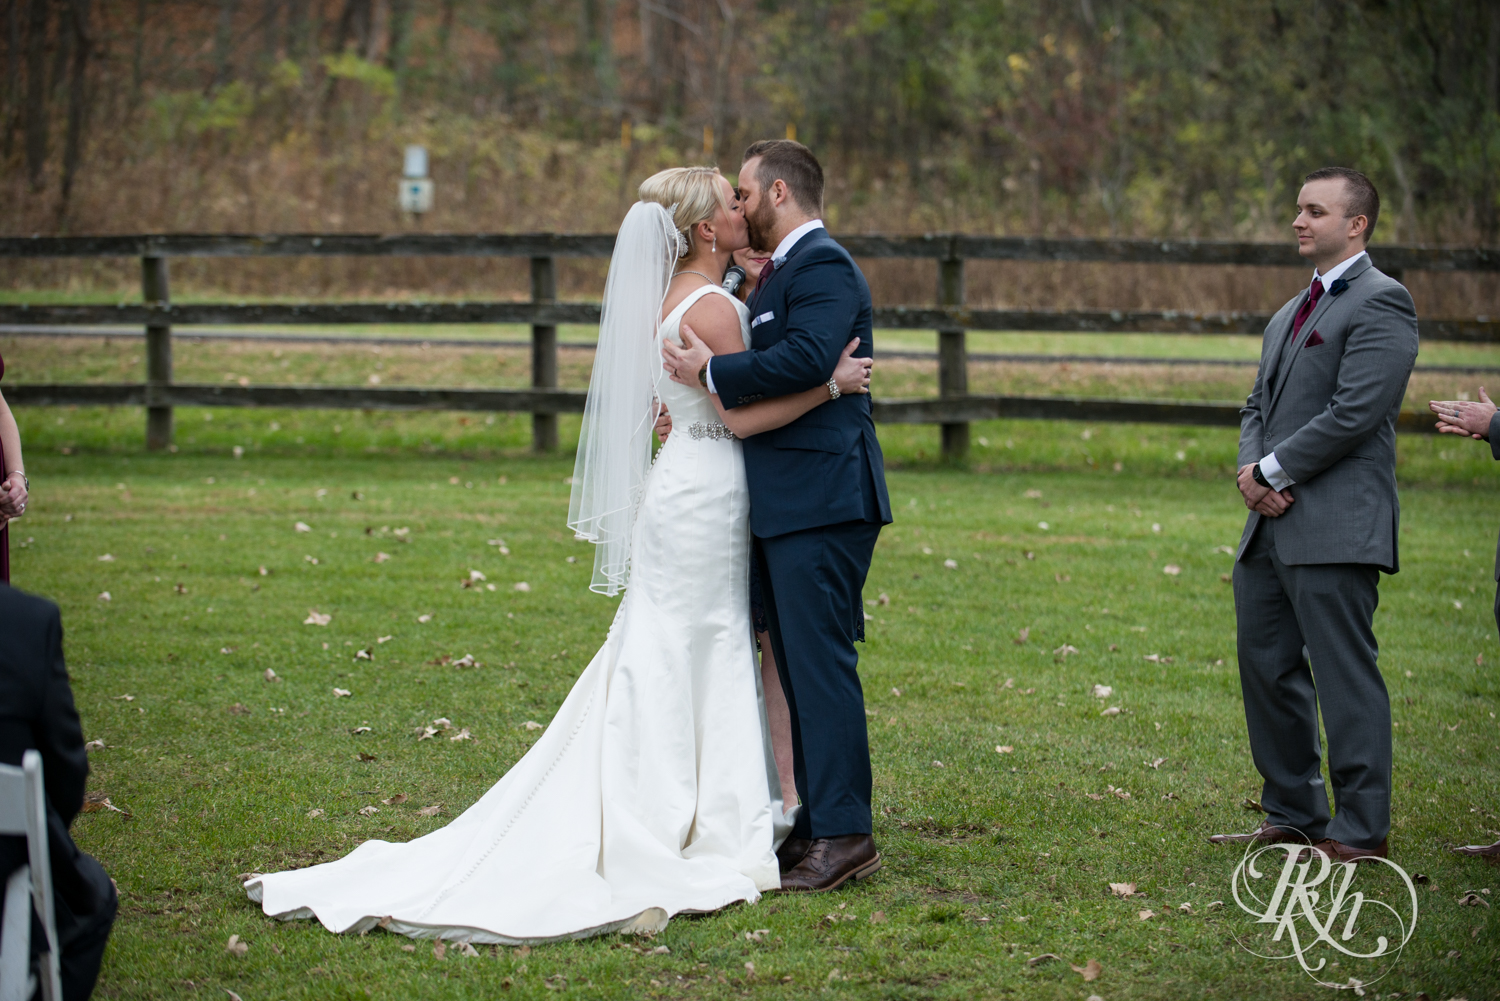 Bride and groom kiss during outdoor wedding ceremony at Mayowood Stone Barn in Rochester, Minnesota.